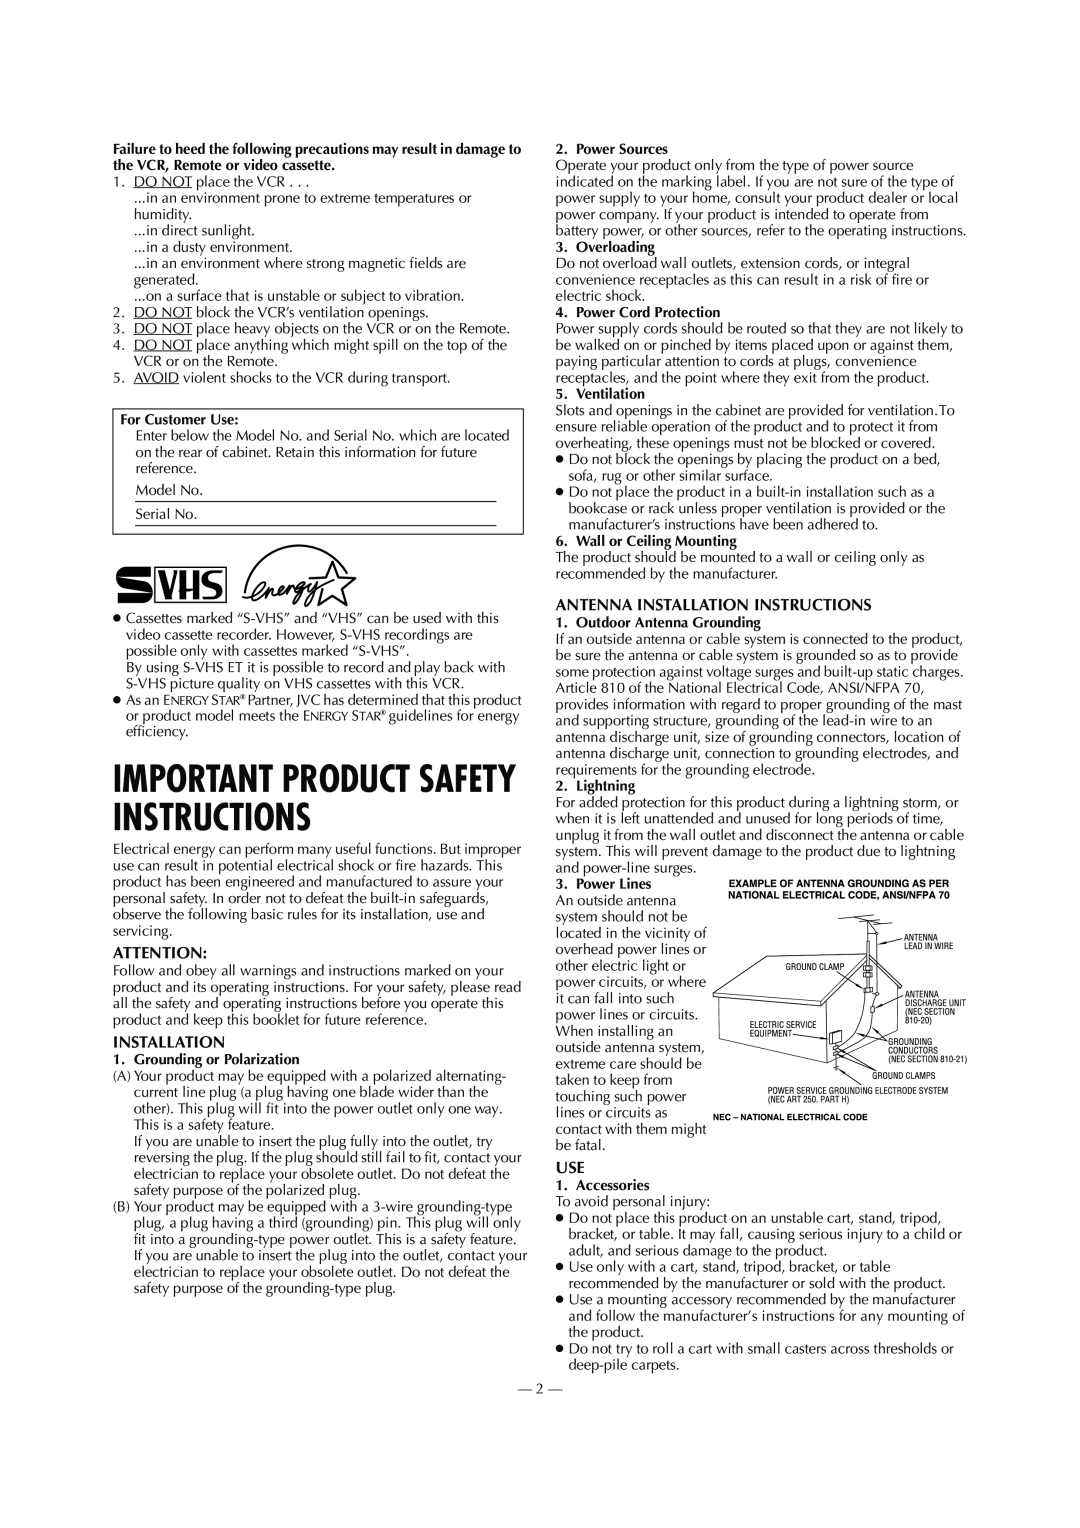 JVC HR-S2902U Antenna Installation Instructions, Important Product Safety Instructions, For Customer Use, Overloading 